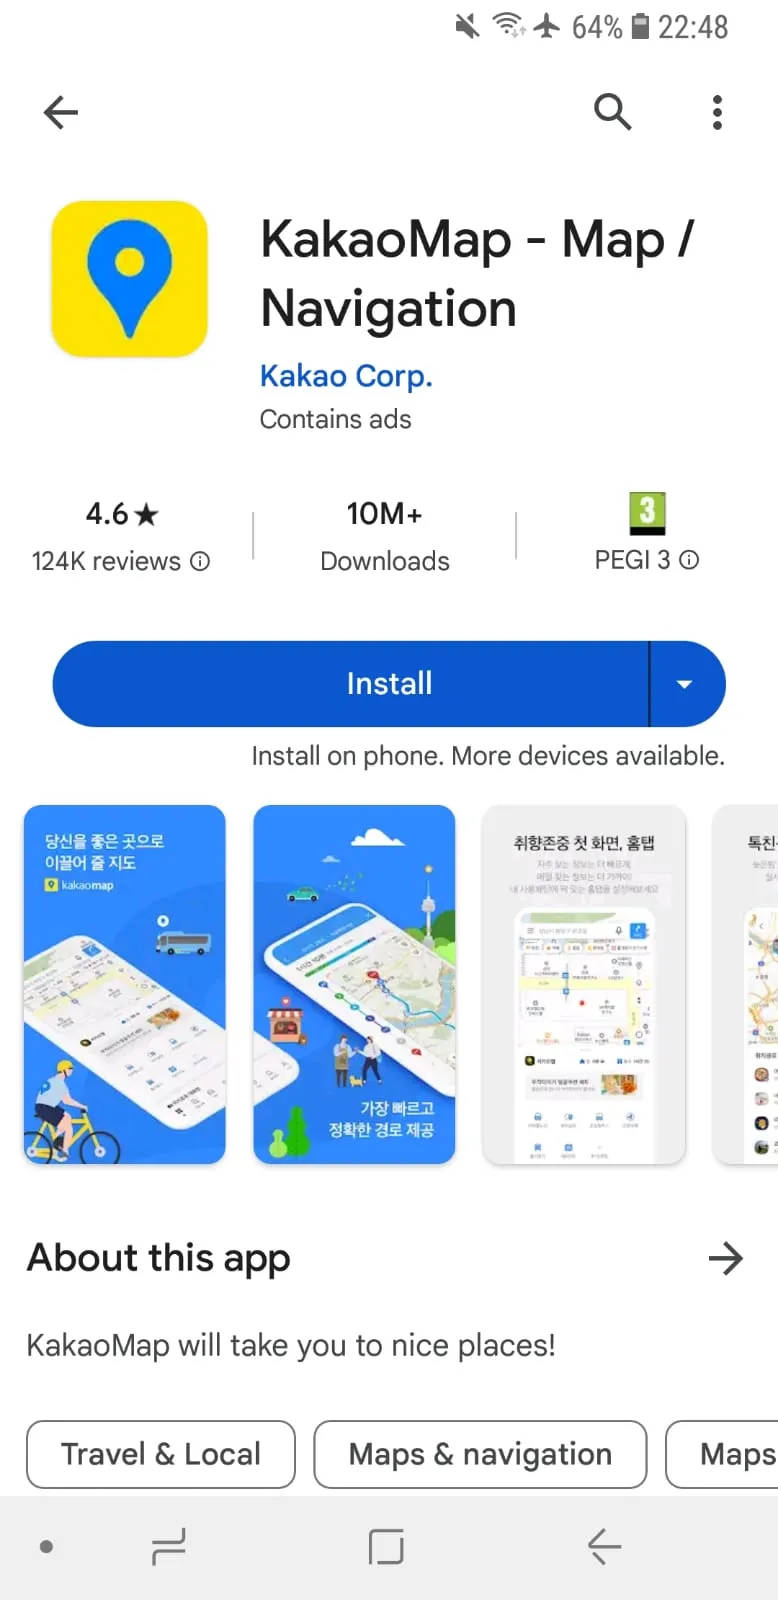 Download KakaoMap from Google Play